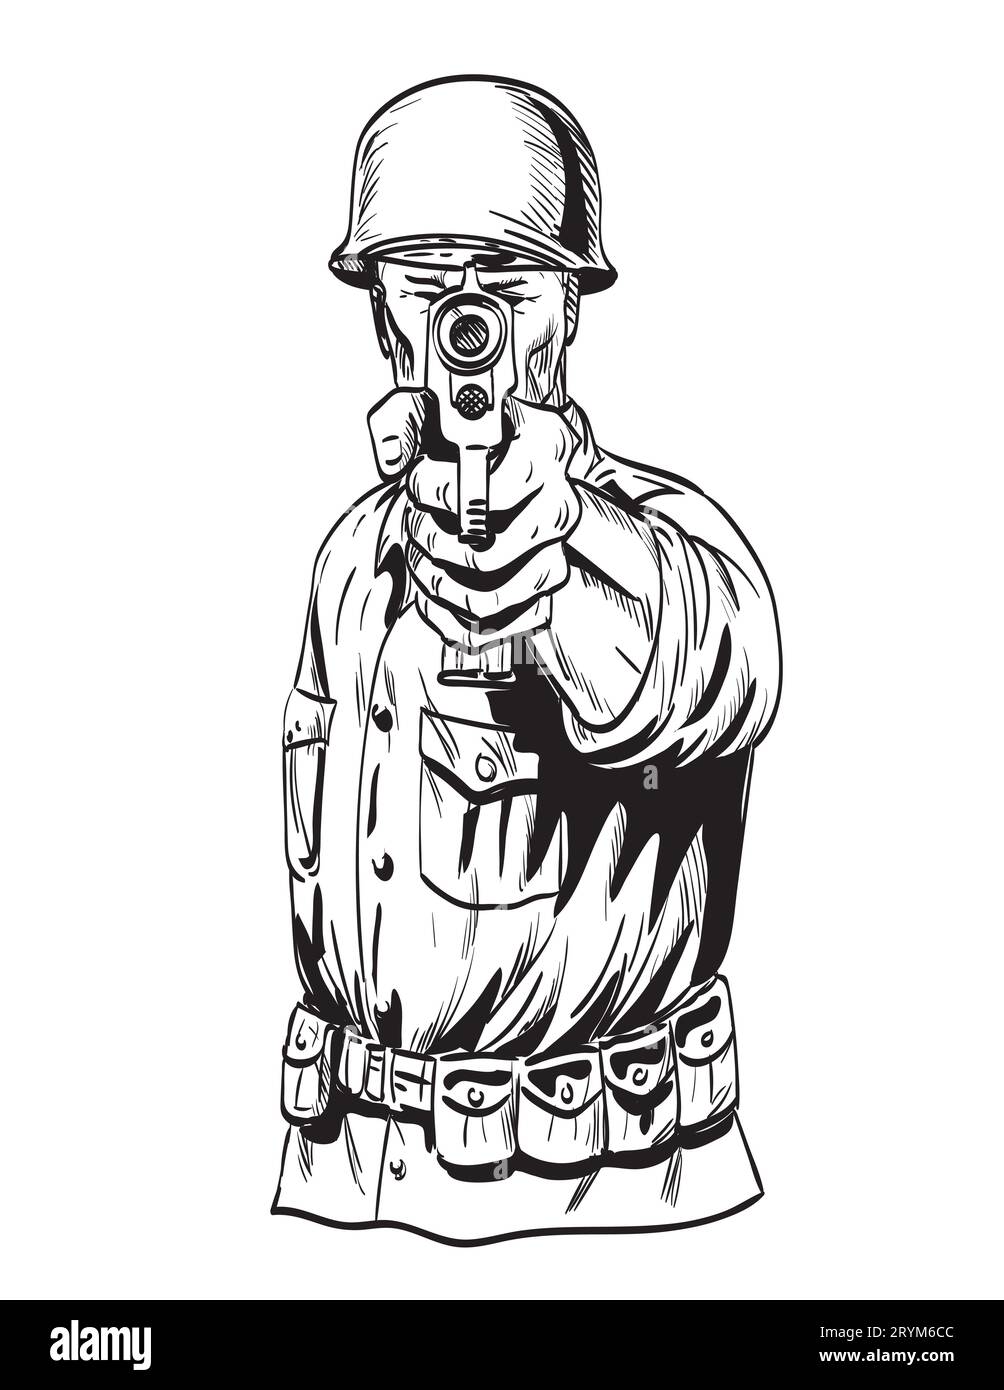 World War Two American GI Soldier Aiming Pistol Viewed from Front Comics Style Drawing Stock Photo